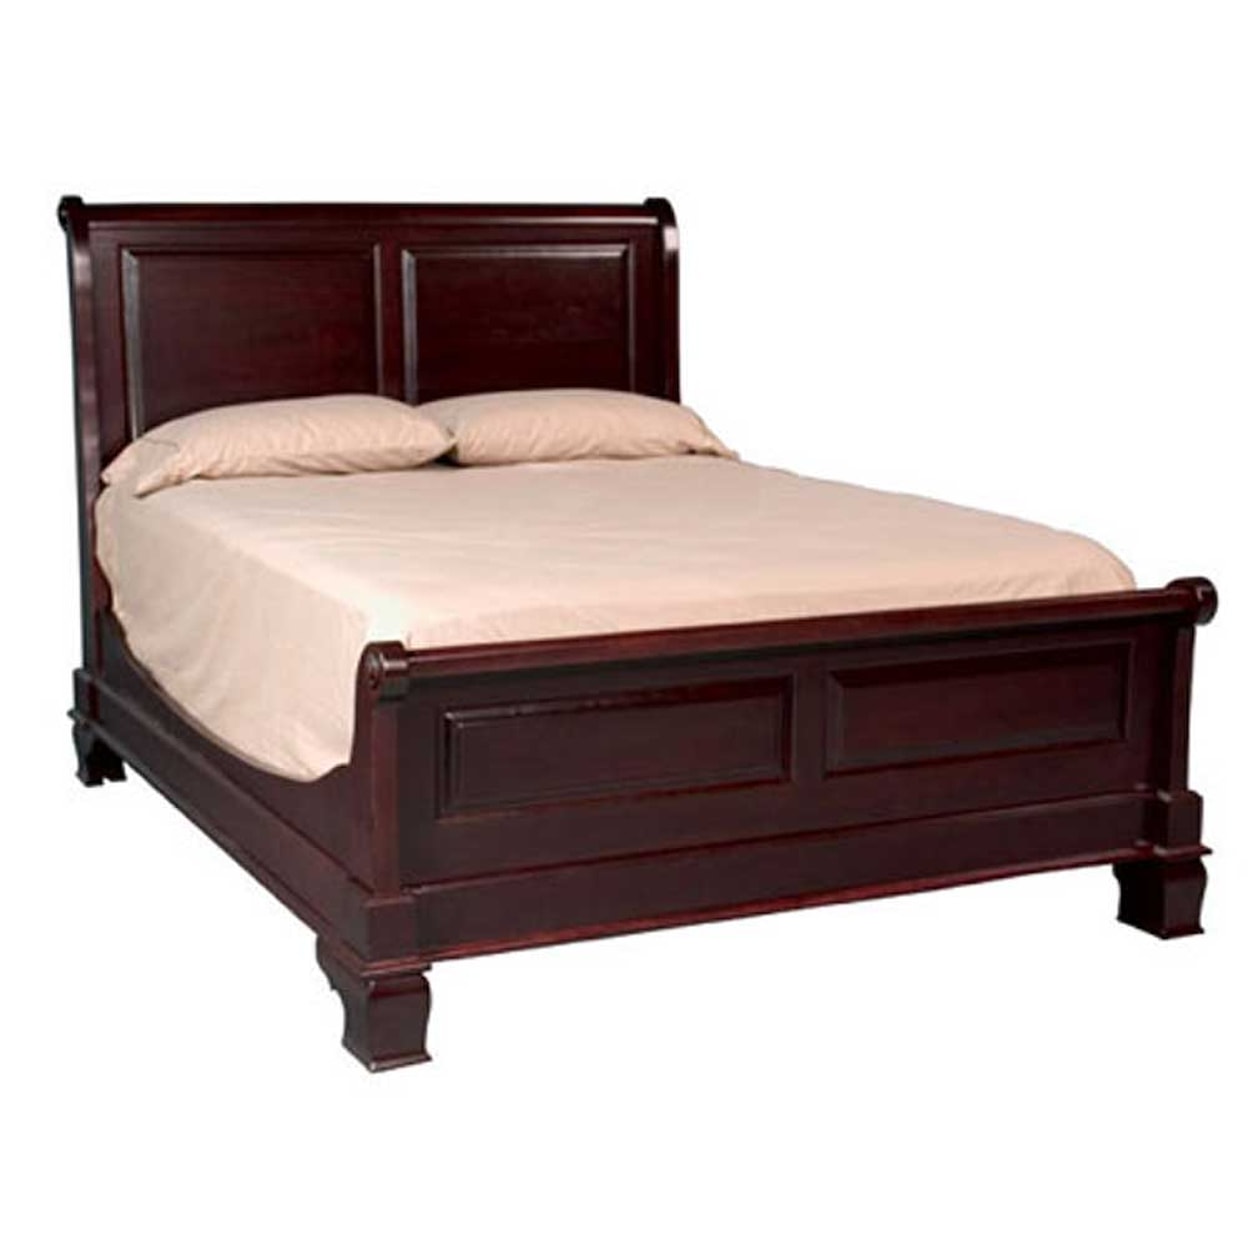 Simply Amish Imperial Amish Full Sleigh Bed